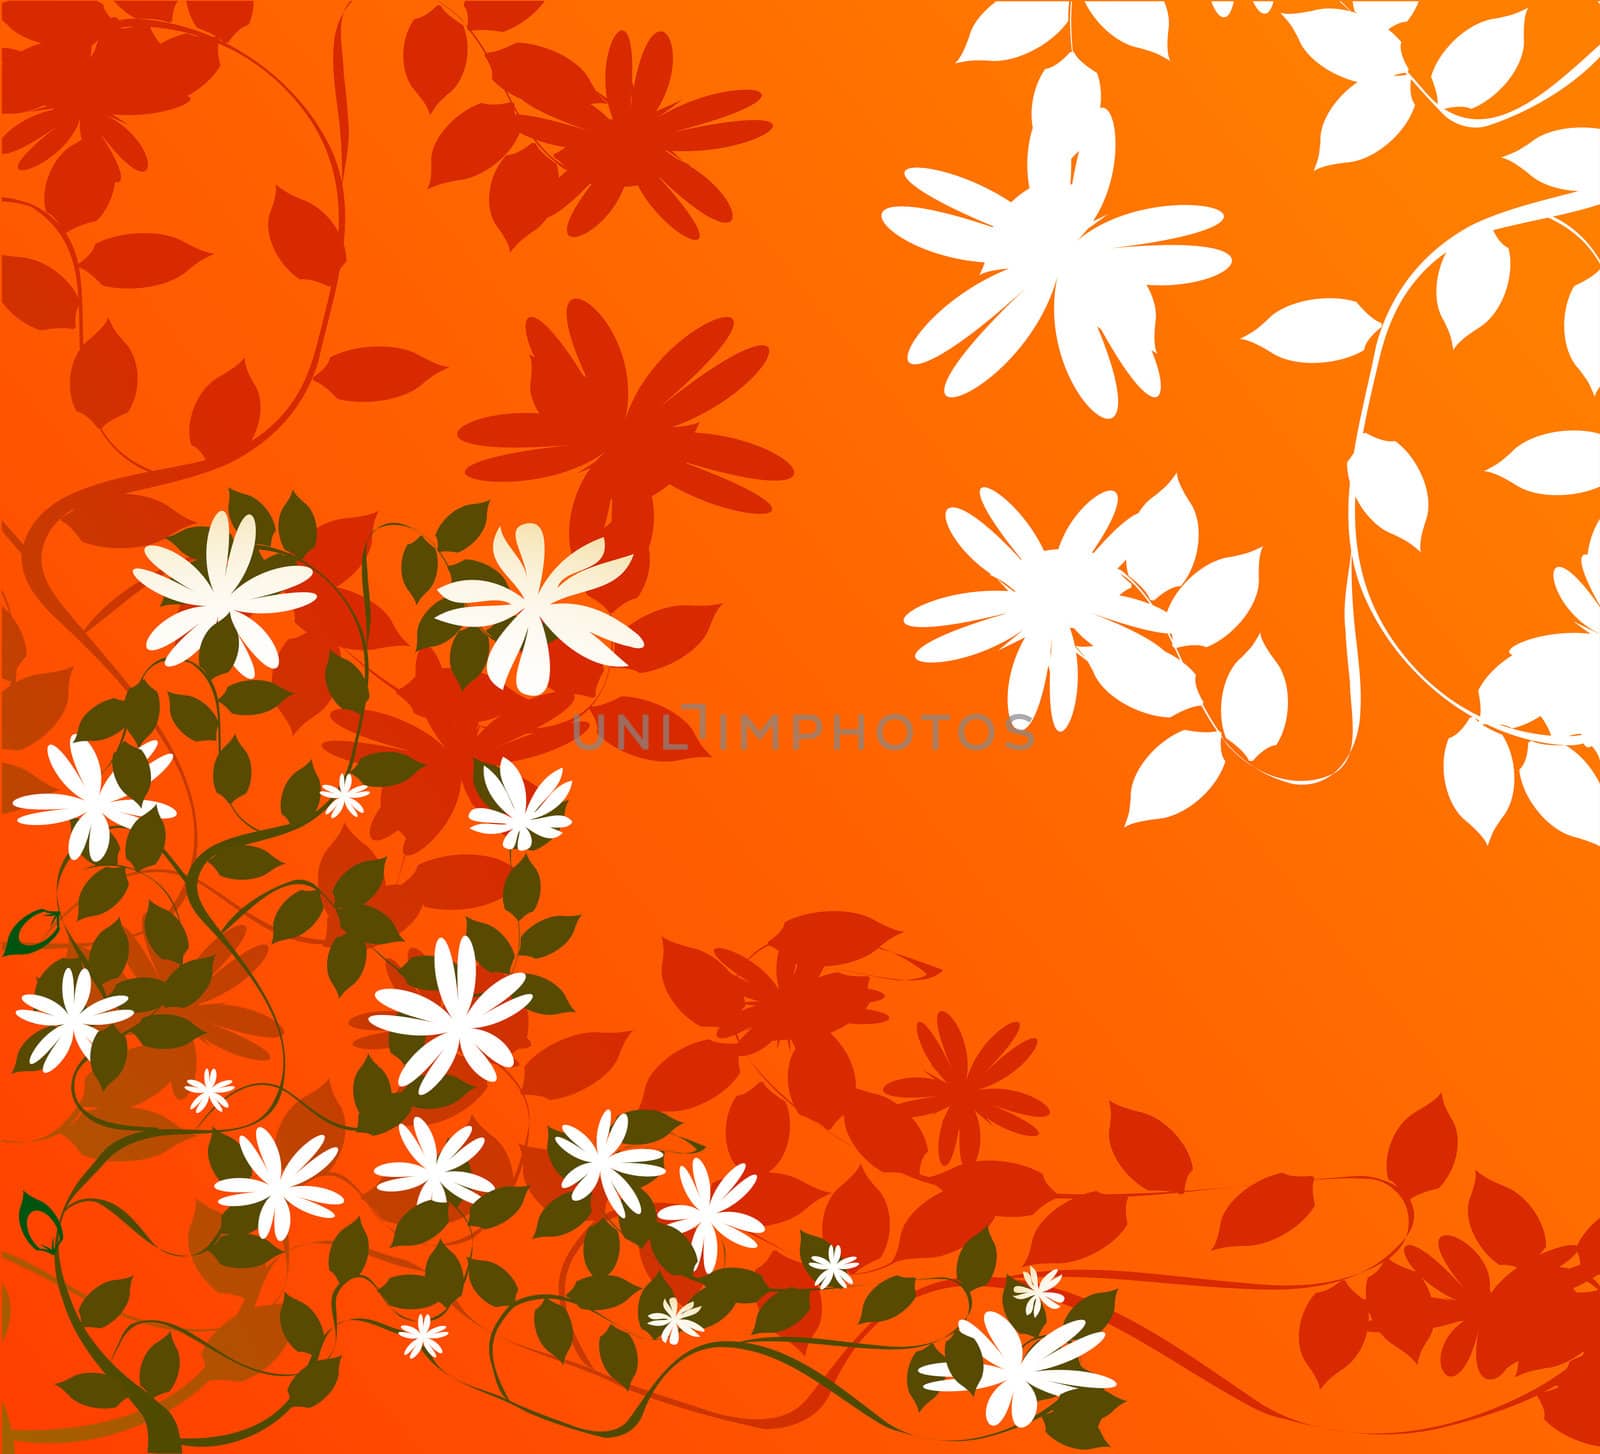 Floral wallpaper by Lirch